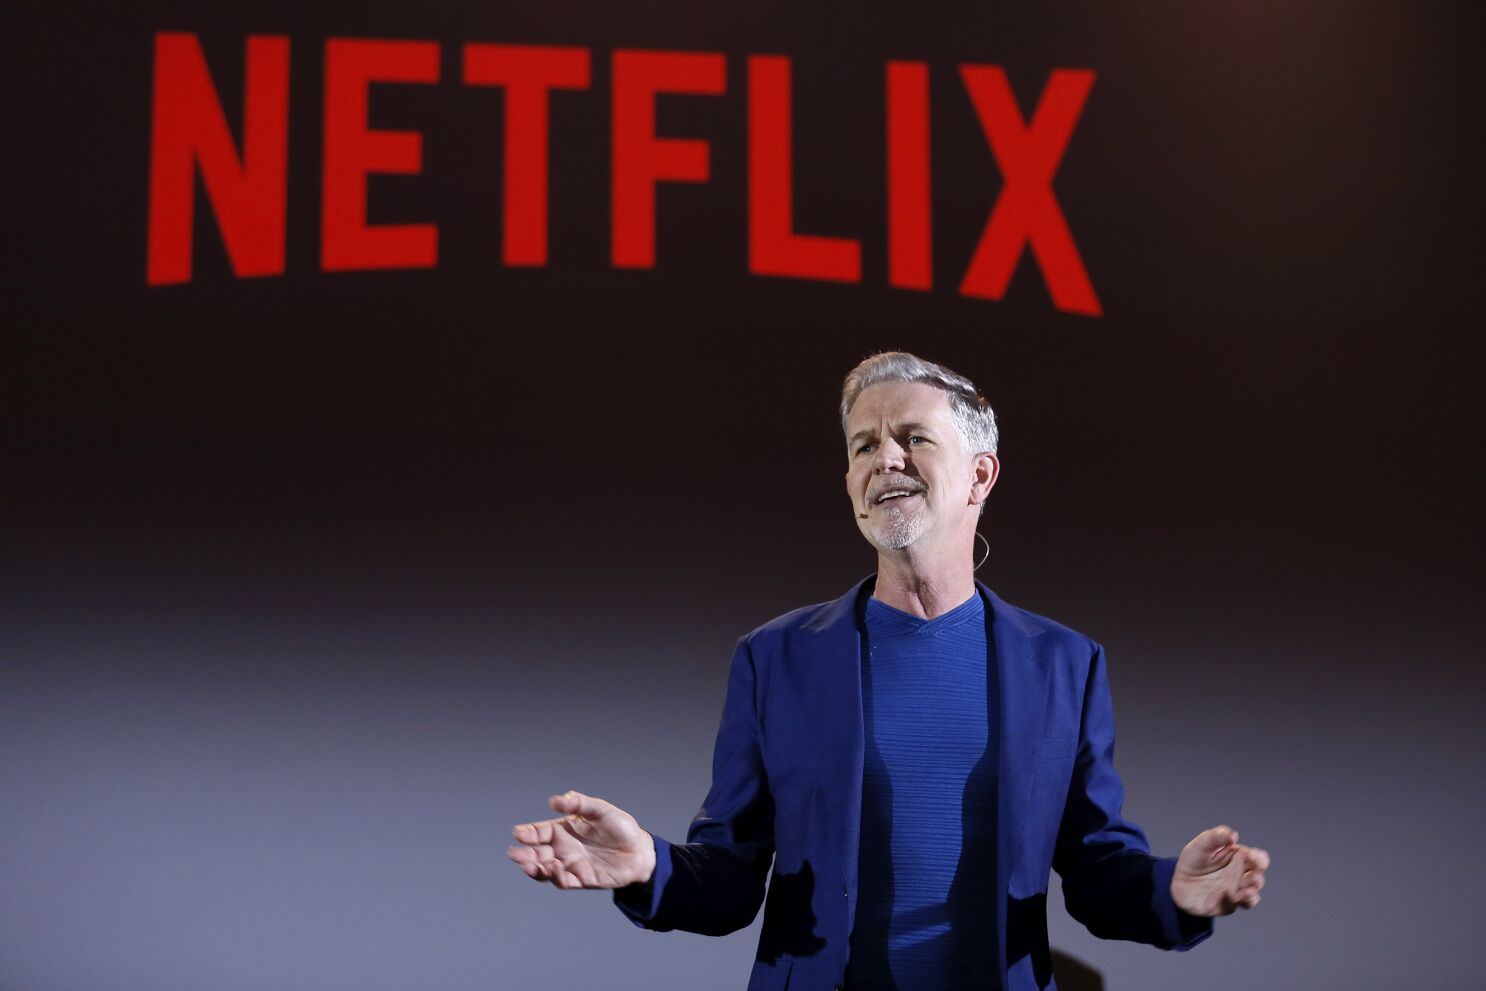 Netflix CEO Reed Hastings Resigns, Positions the Streaming Service for Higher Profitability